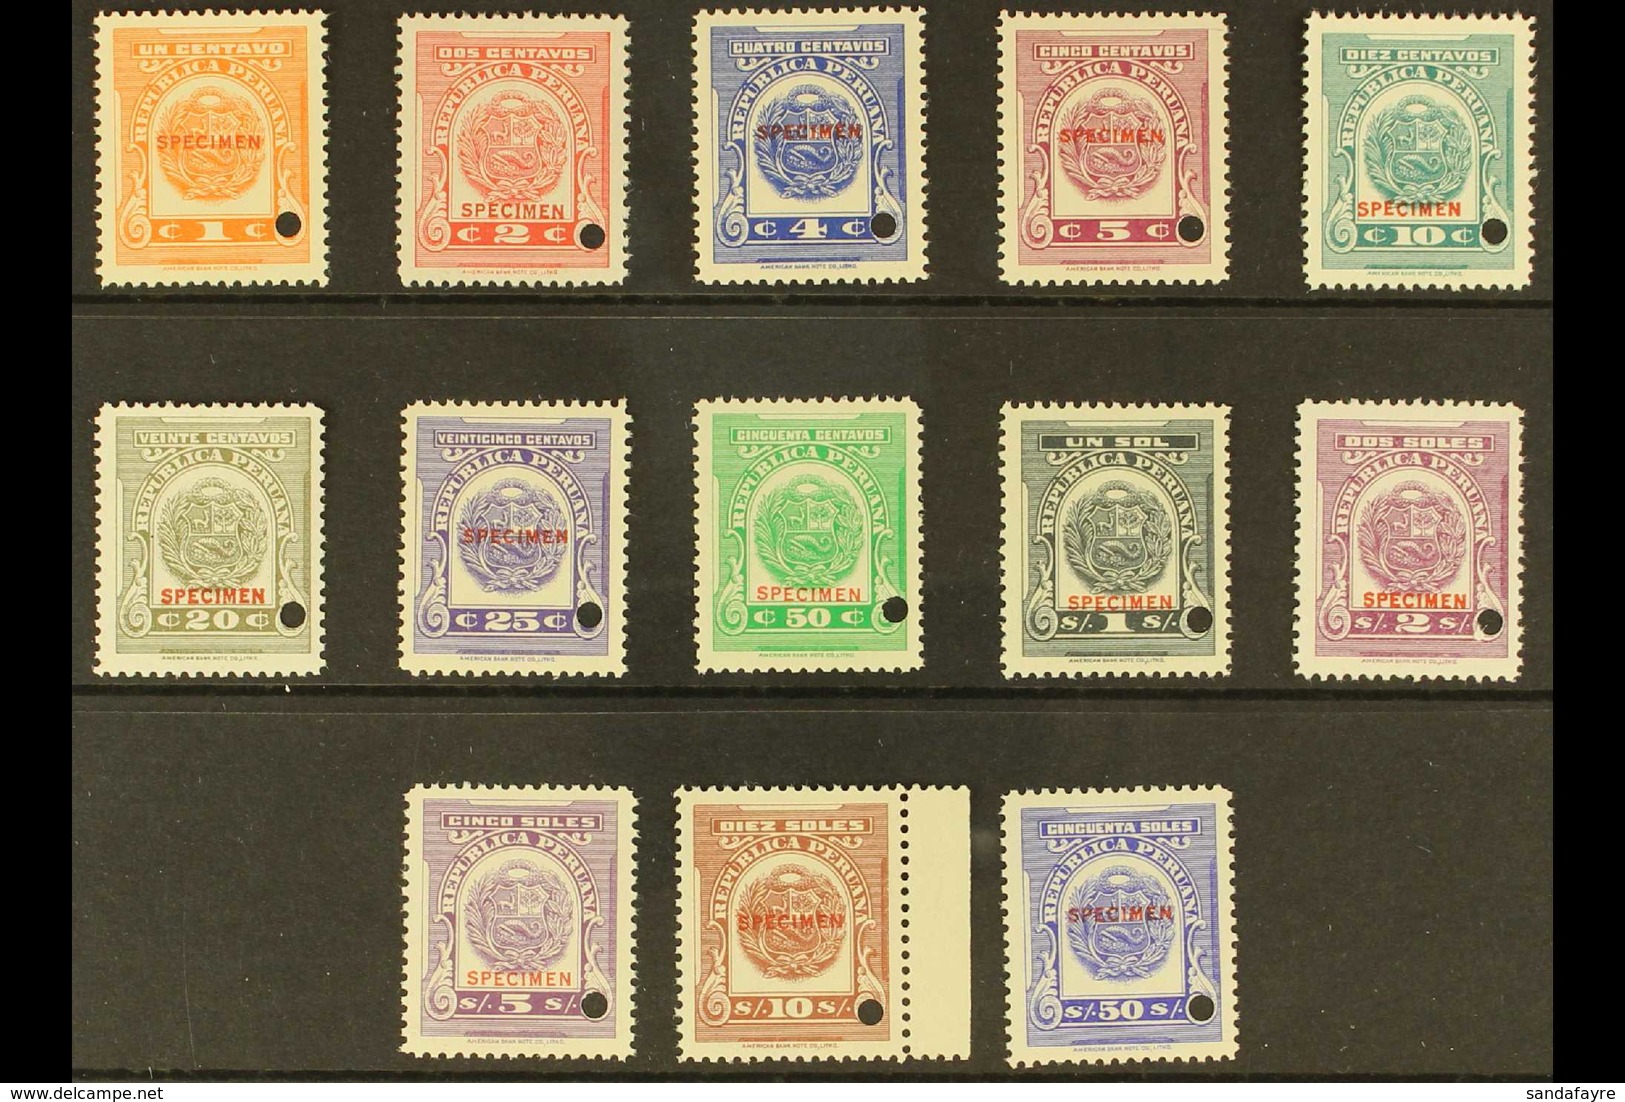 REVENUES  DOCUMENT STAMPS 1937 Complete Set With "SPECIMEN" Overprints And Small Security Punch Holes, Never Hinged Mint - Peru